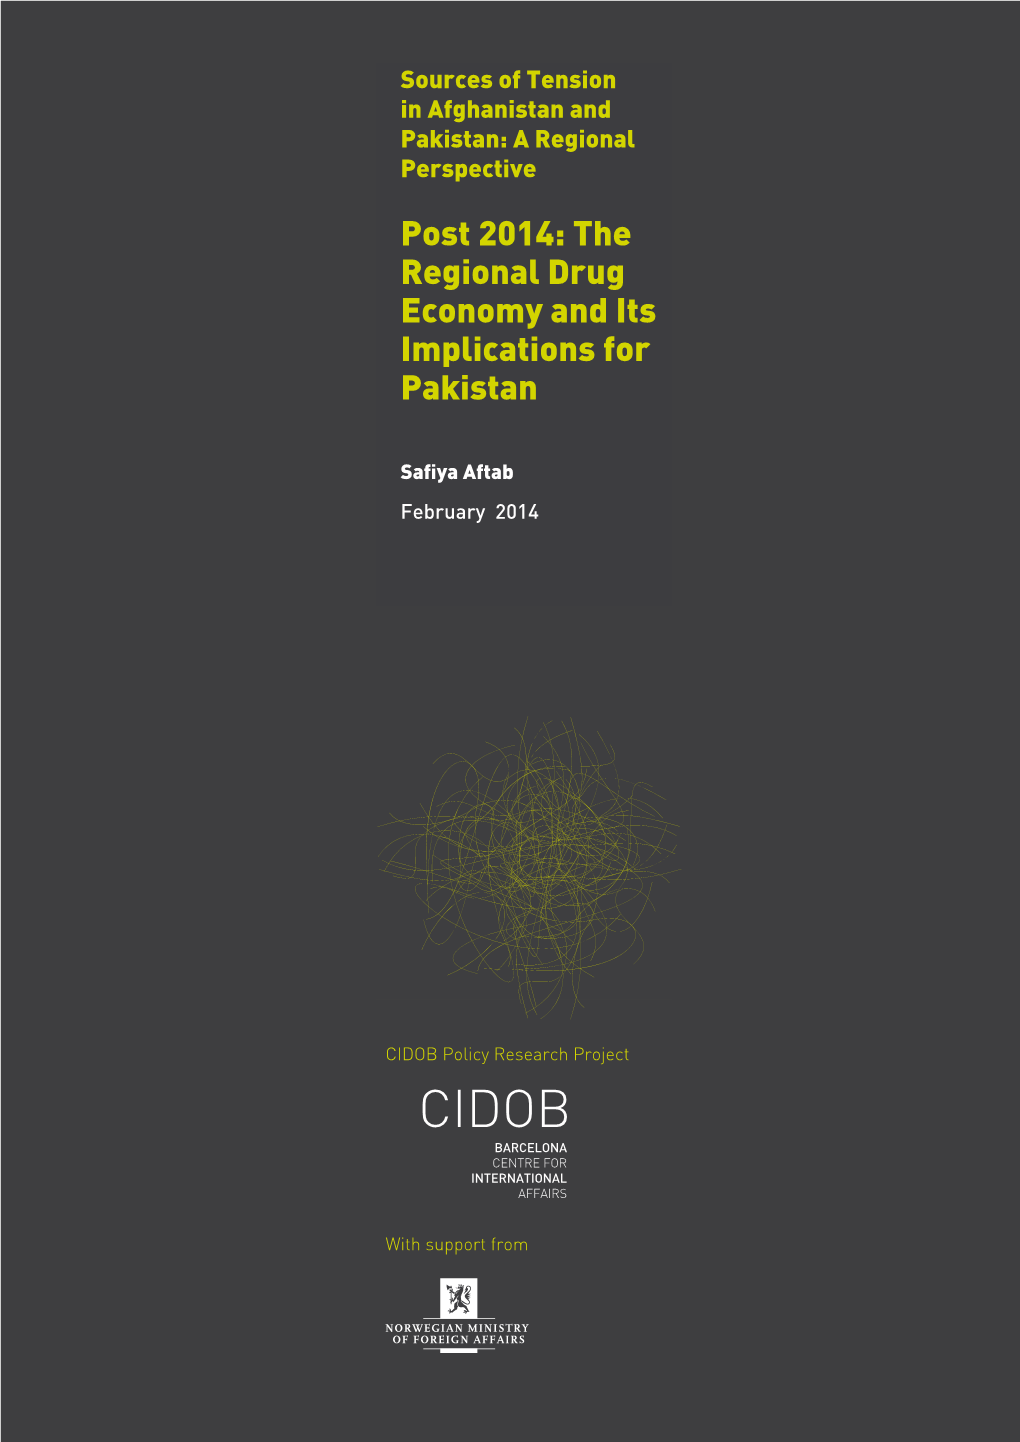 Post 2014: the Regional Drug Economy and Its Implications for Pakistan